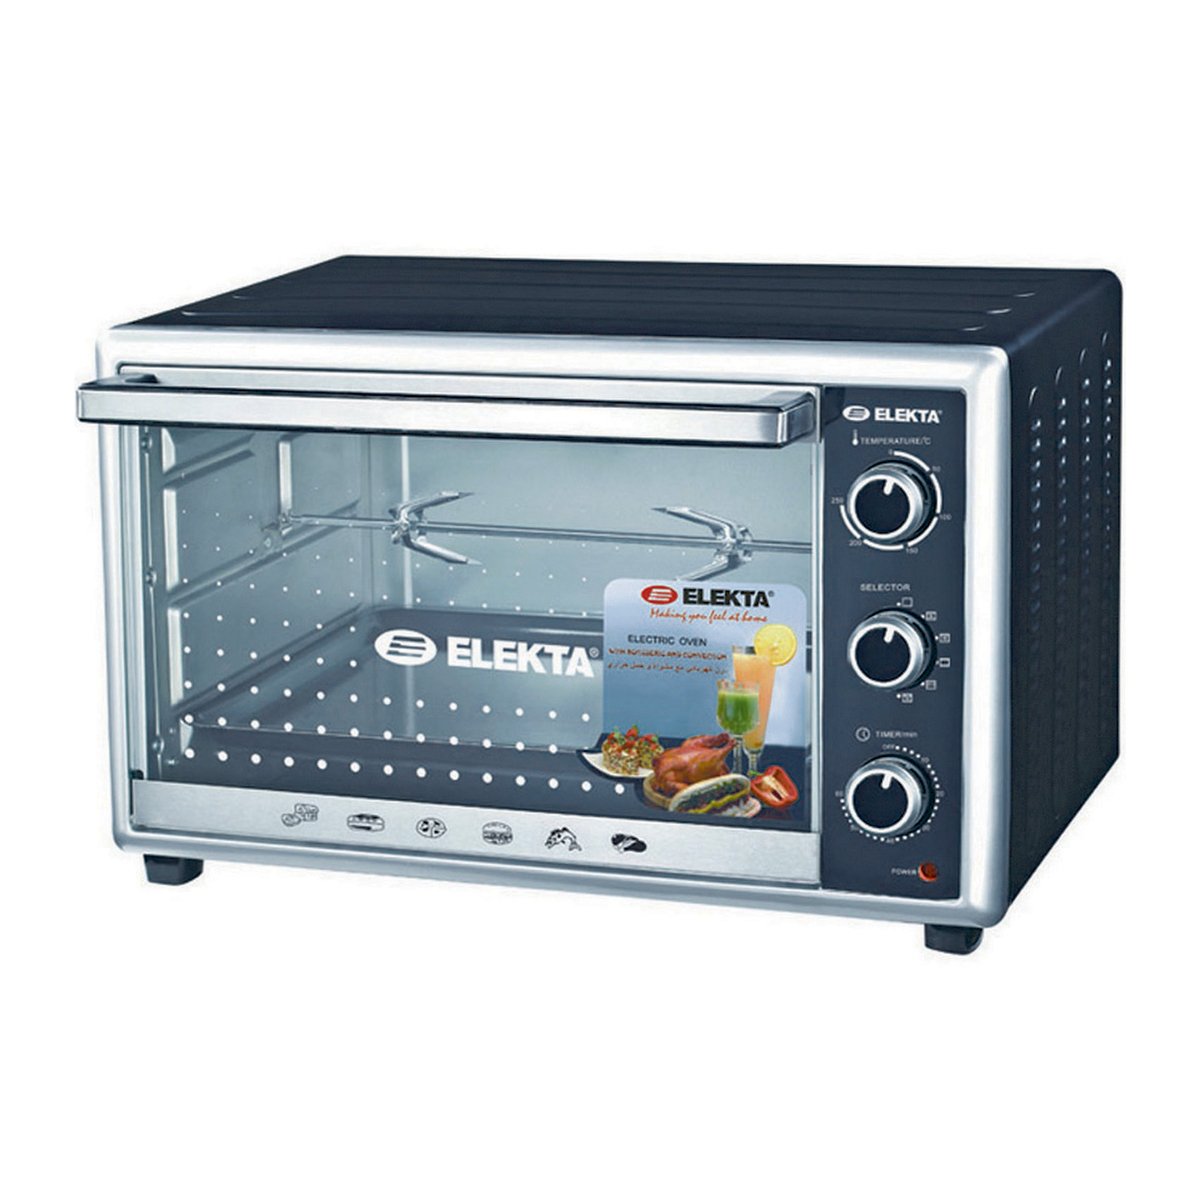 Elekta Electric Oven with Rotisserie with Convection EBRO-424CG(K) 42Ltr